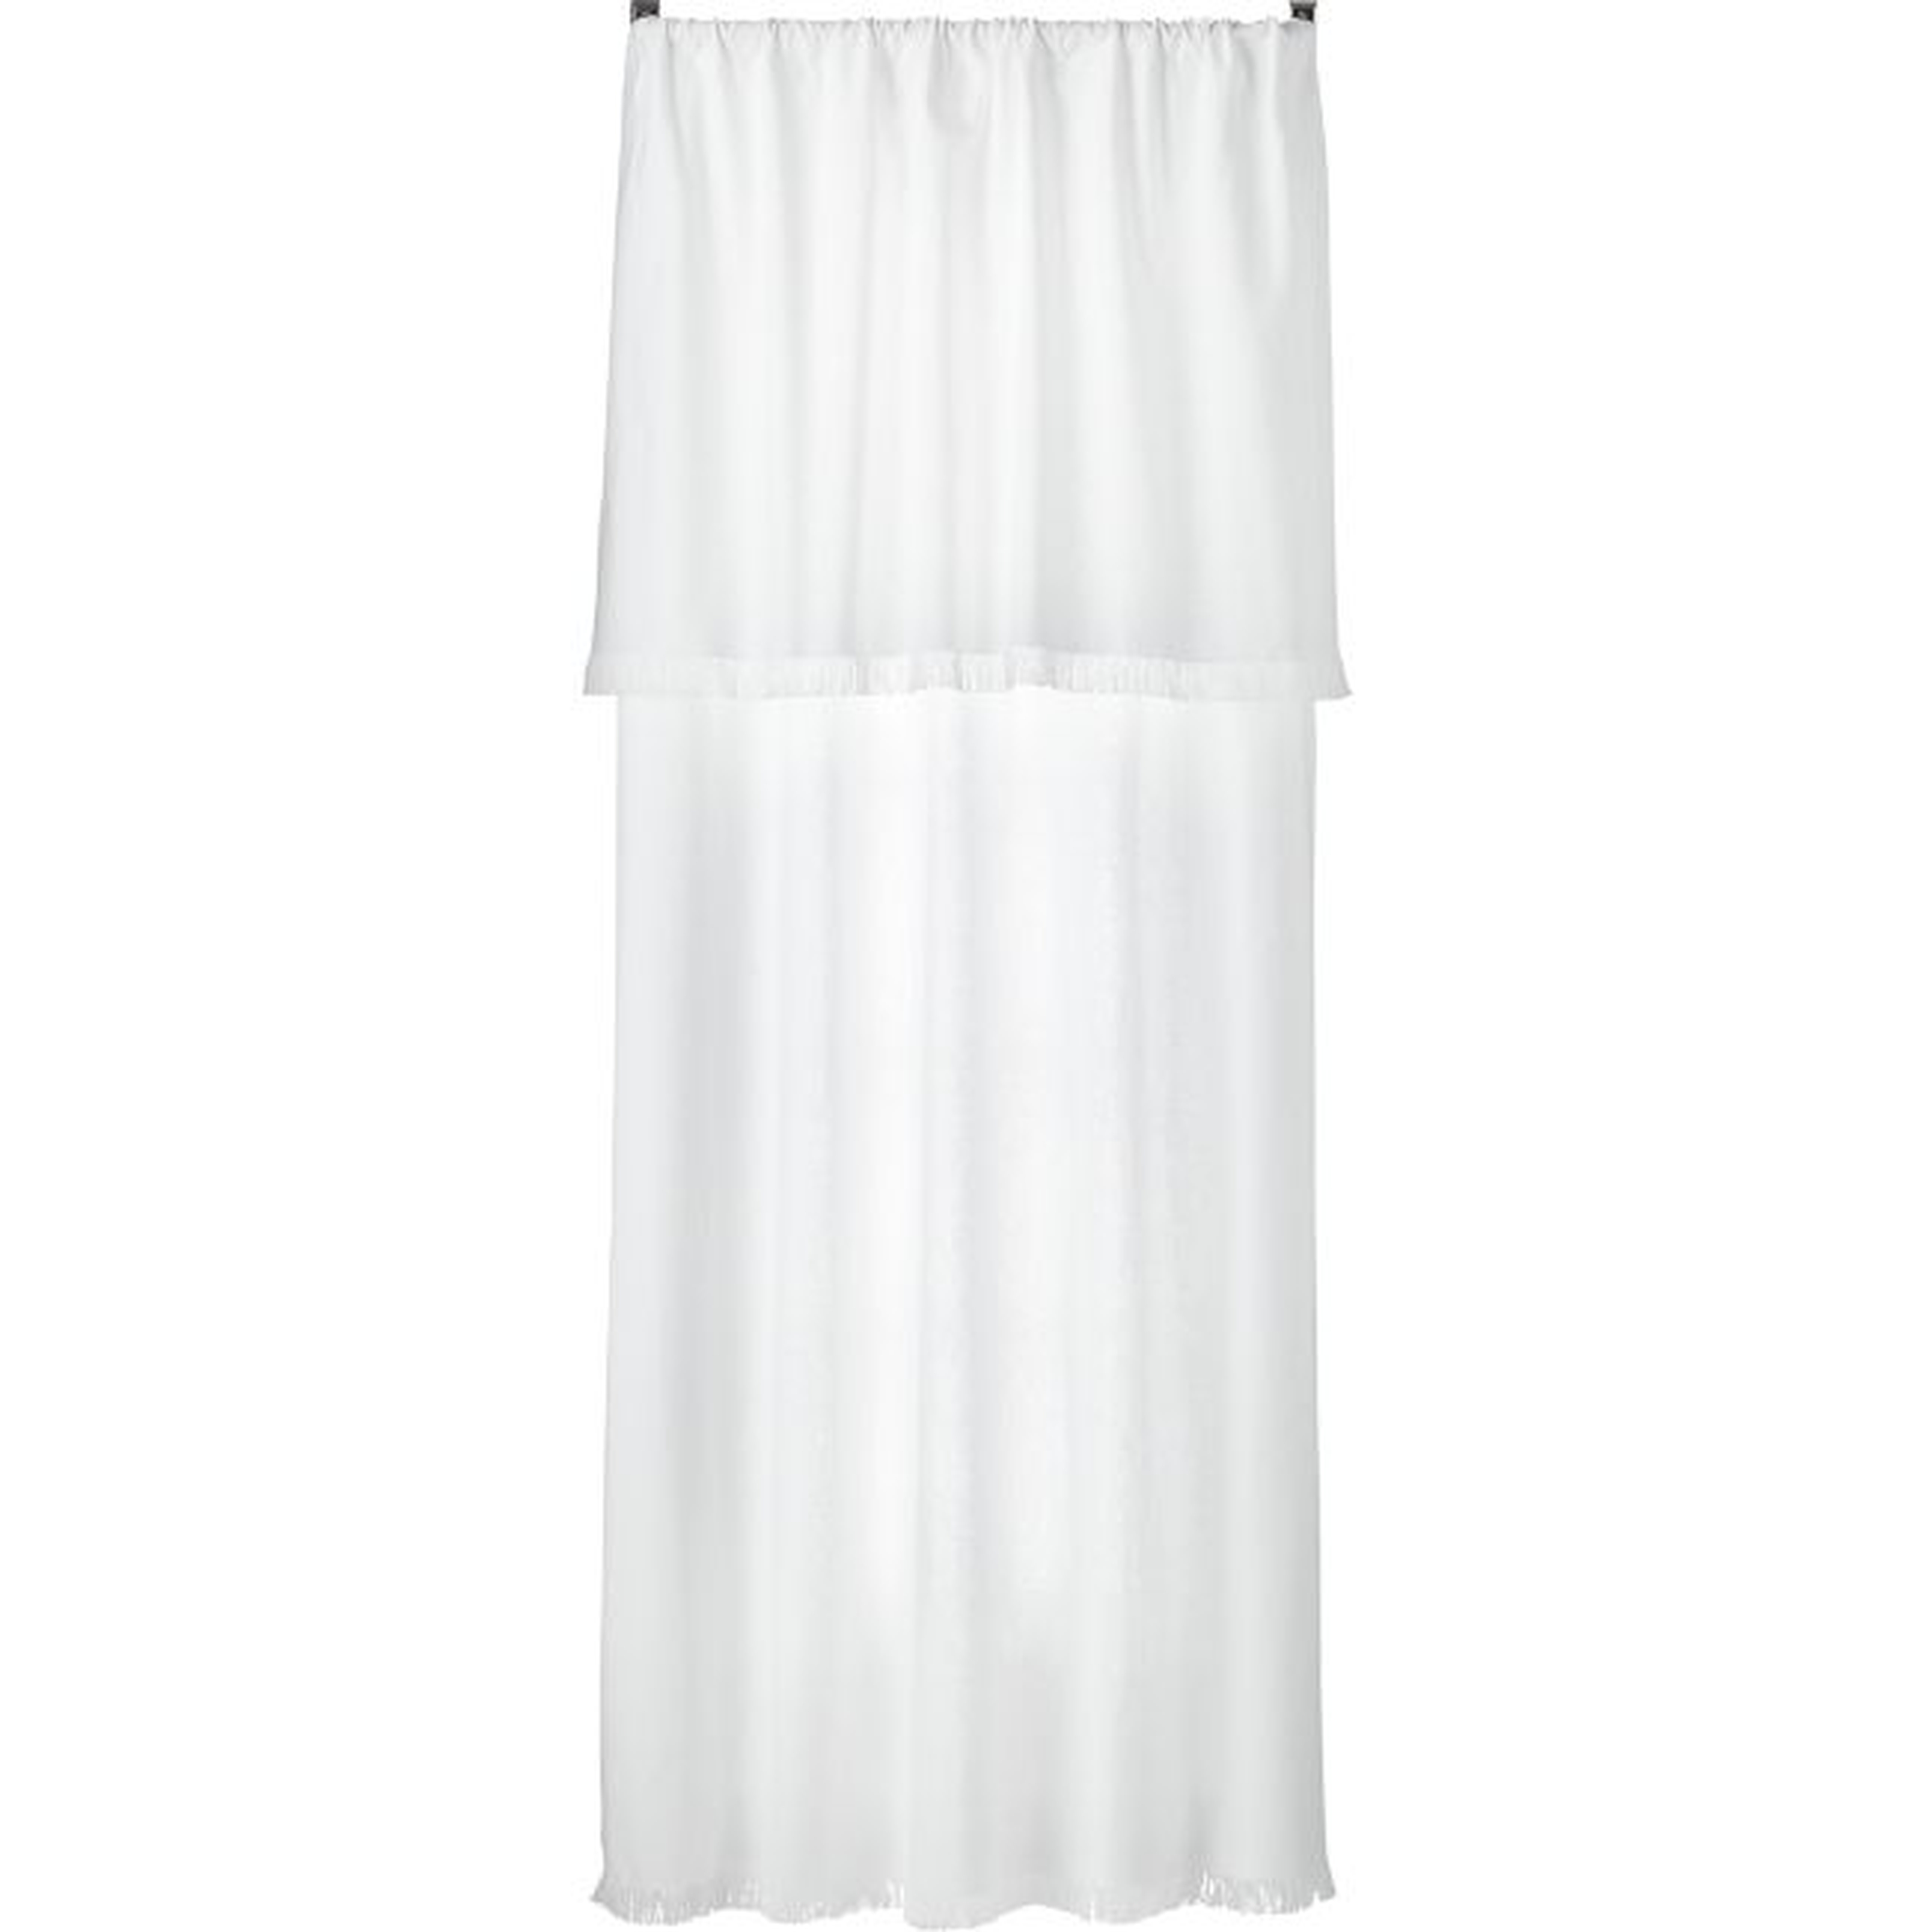 Wallace Freesize White Curtain Panel - Crate and Barrel